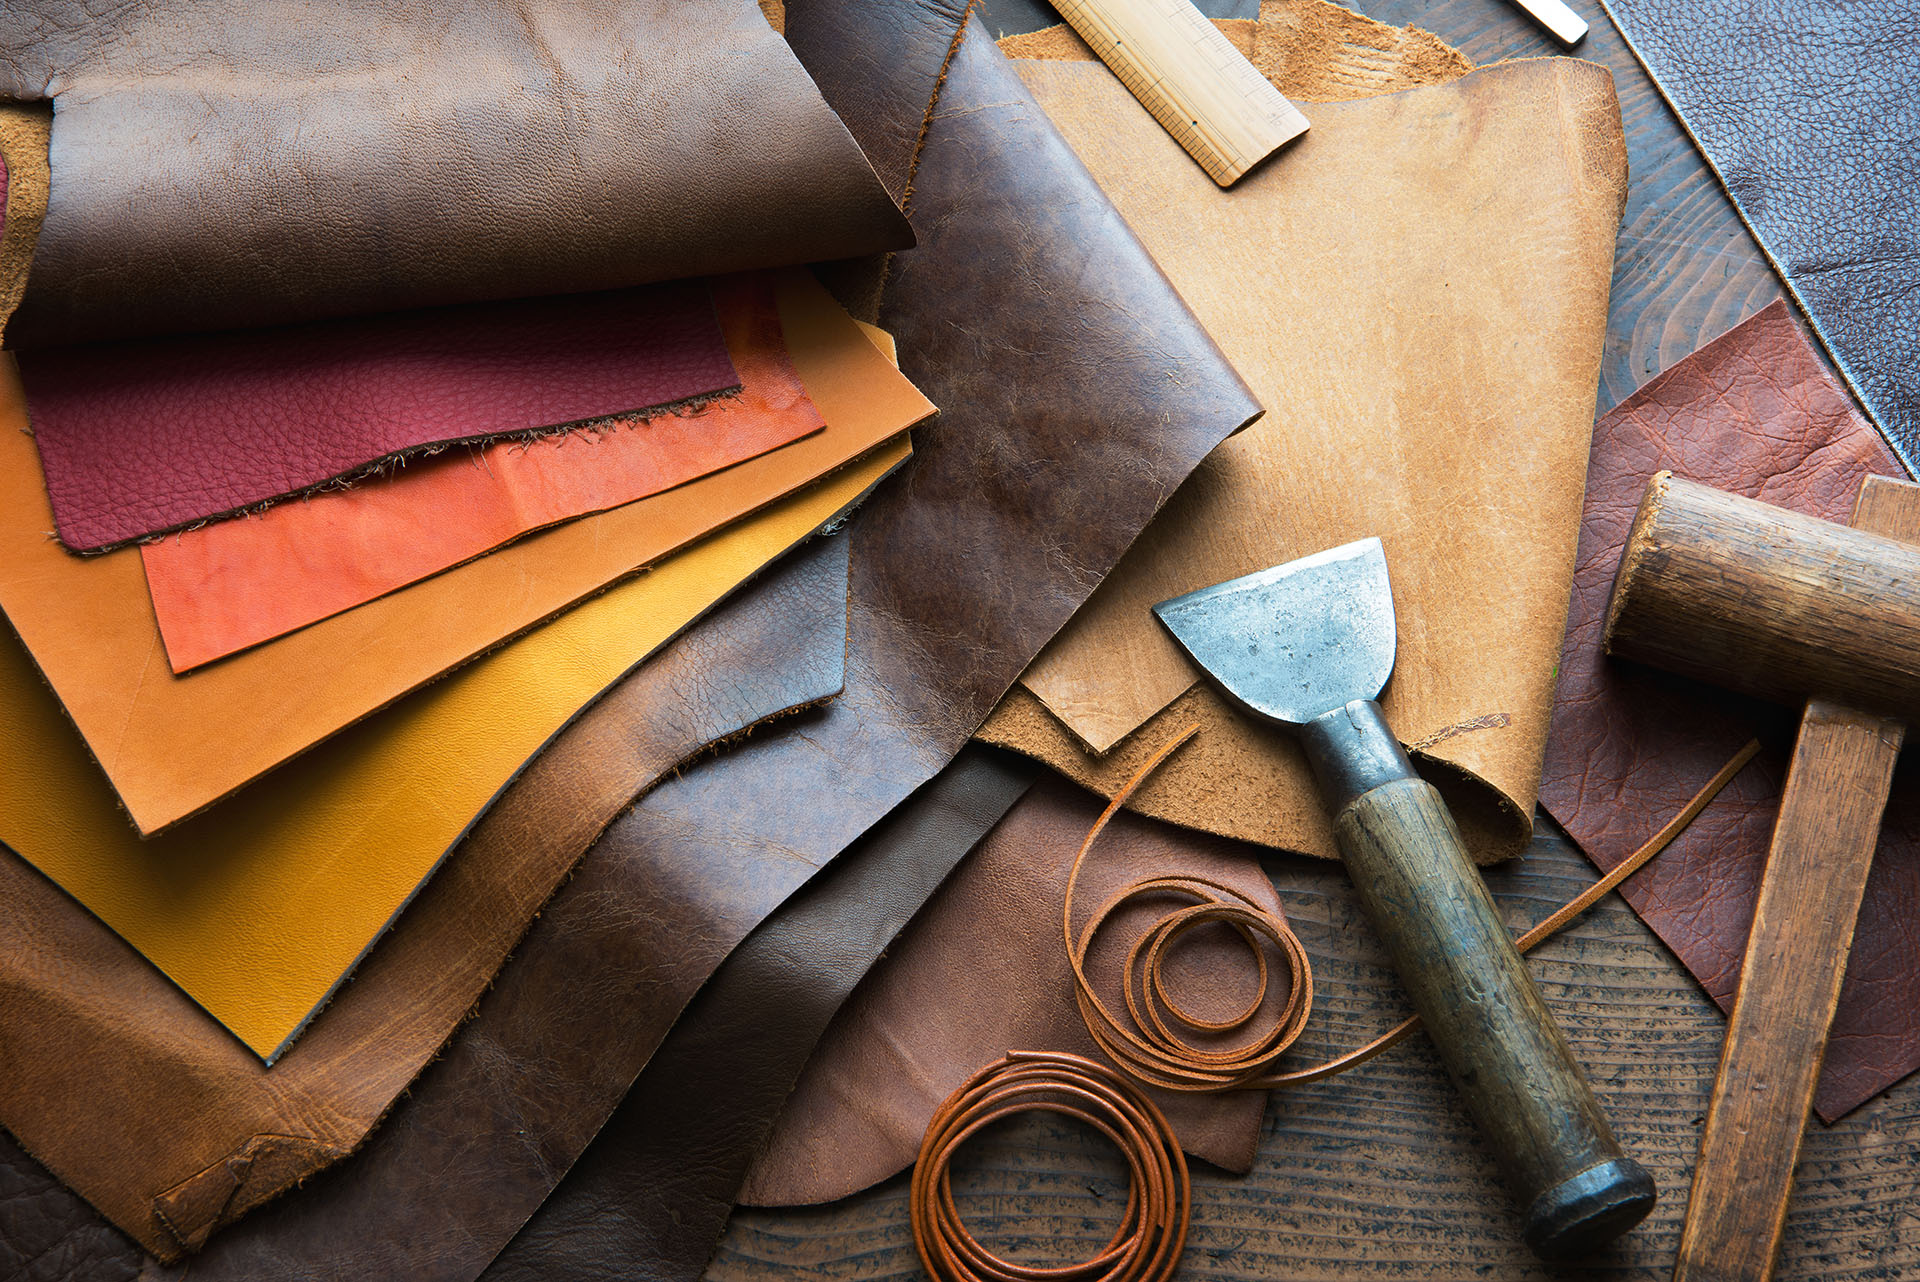 Leather materials and tools representing the luggage repair services of Klumpps Leather & Luggage in Grand Rapids, MI